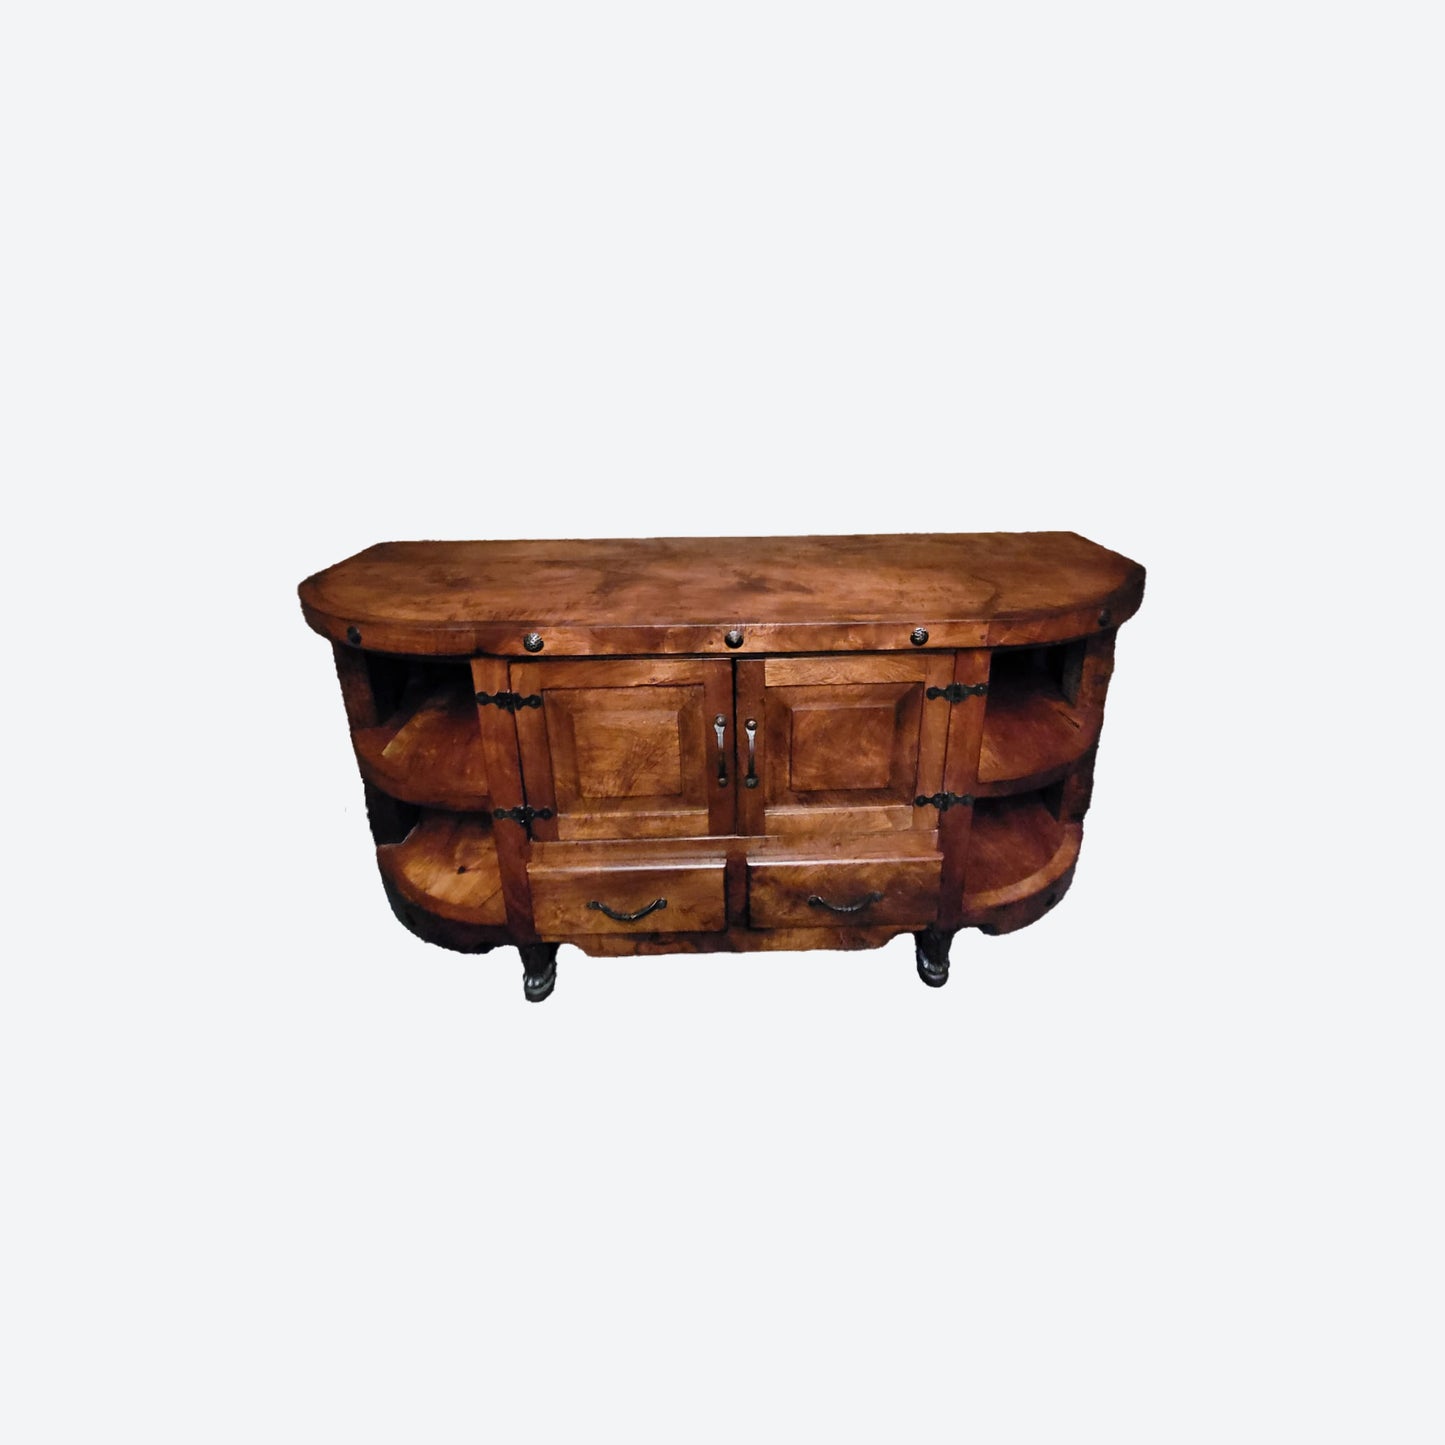 Mesquite   WOOD BAR WITH HAMMERED ACCENTS -SK-SKU 1020